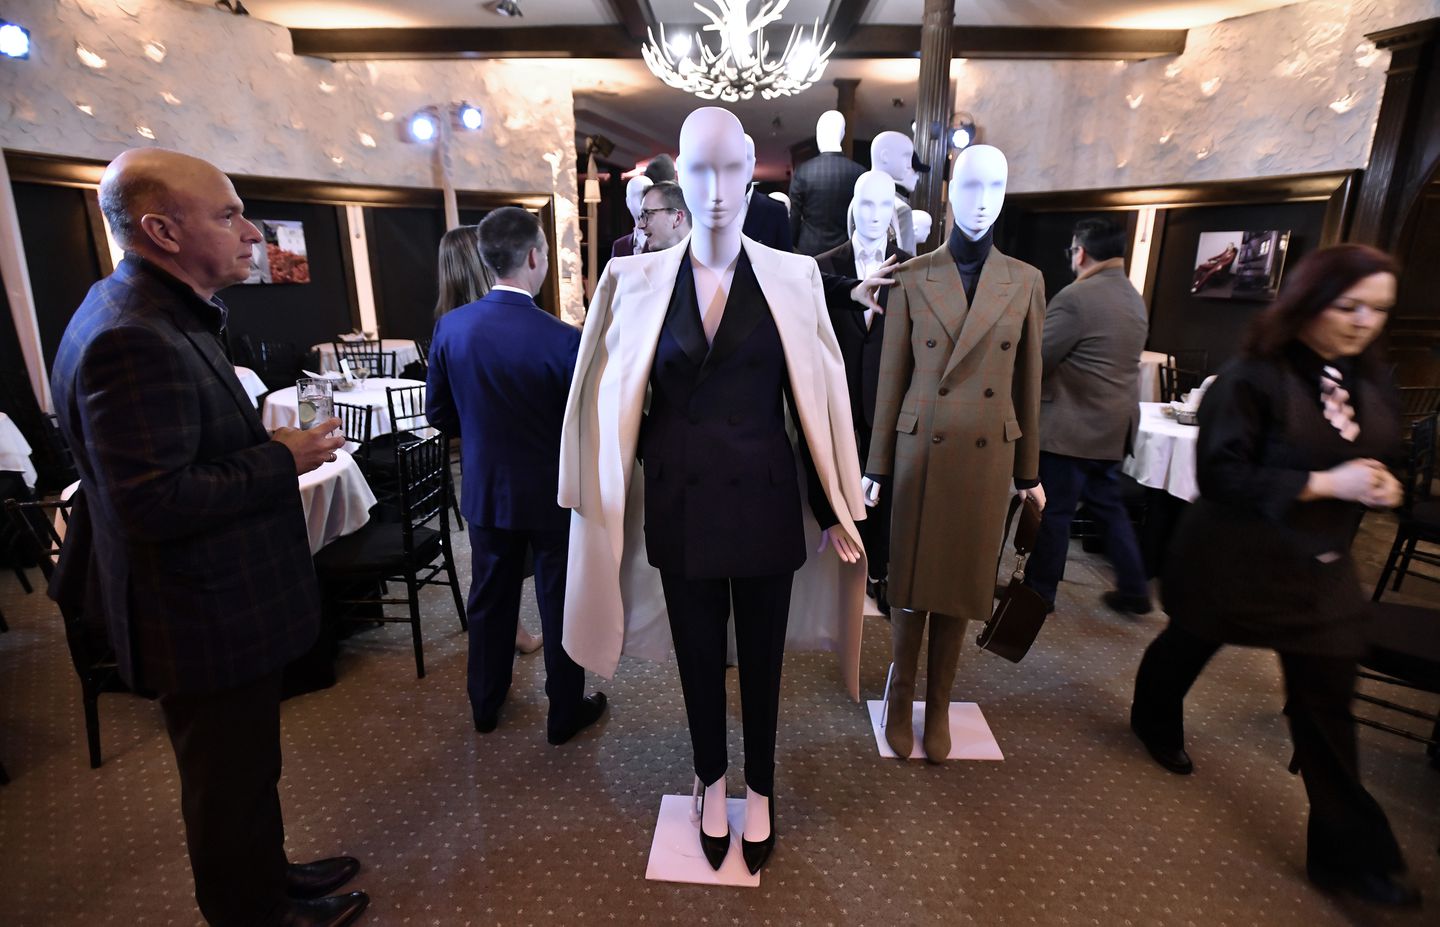 A room full of people with several mannequins wearing clothing